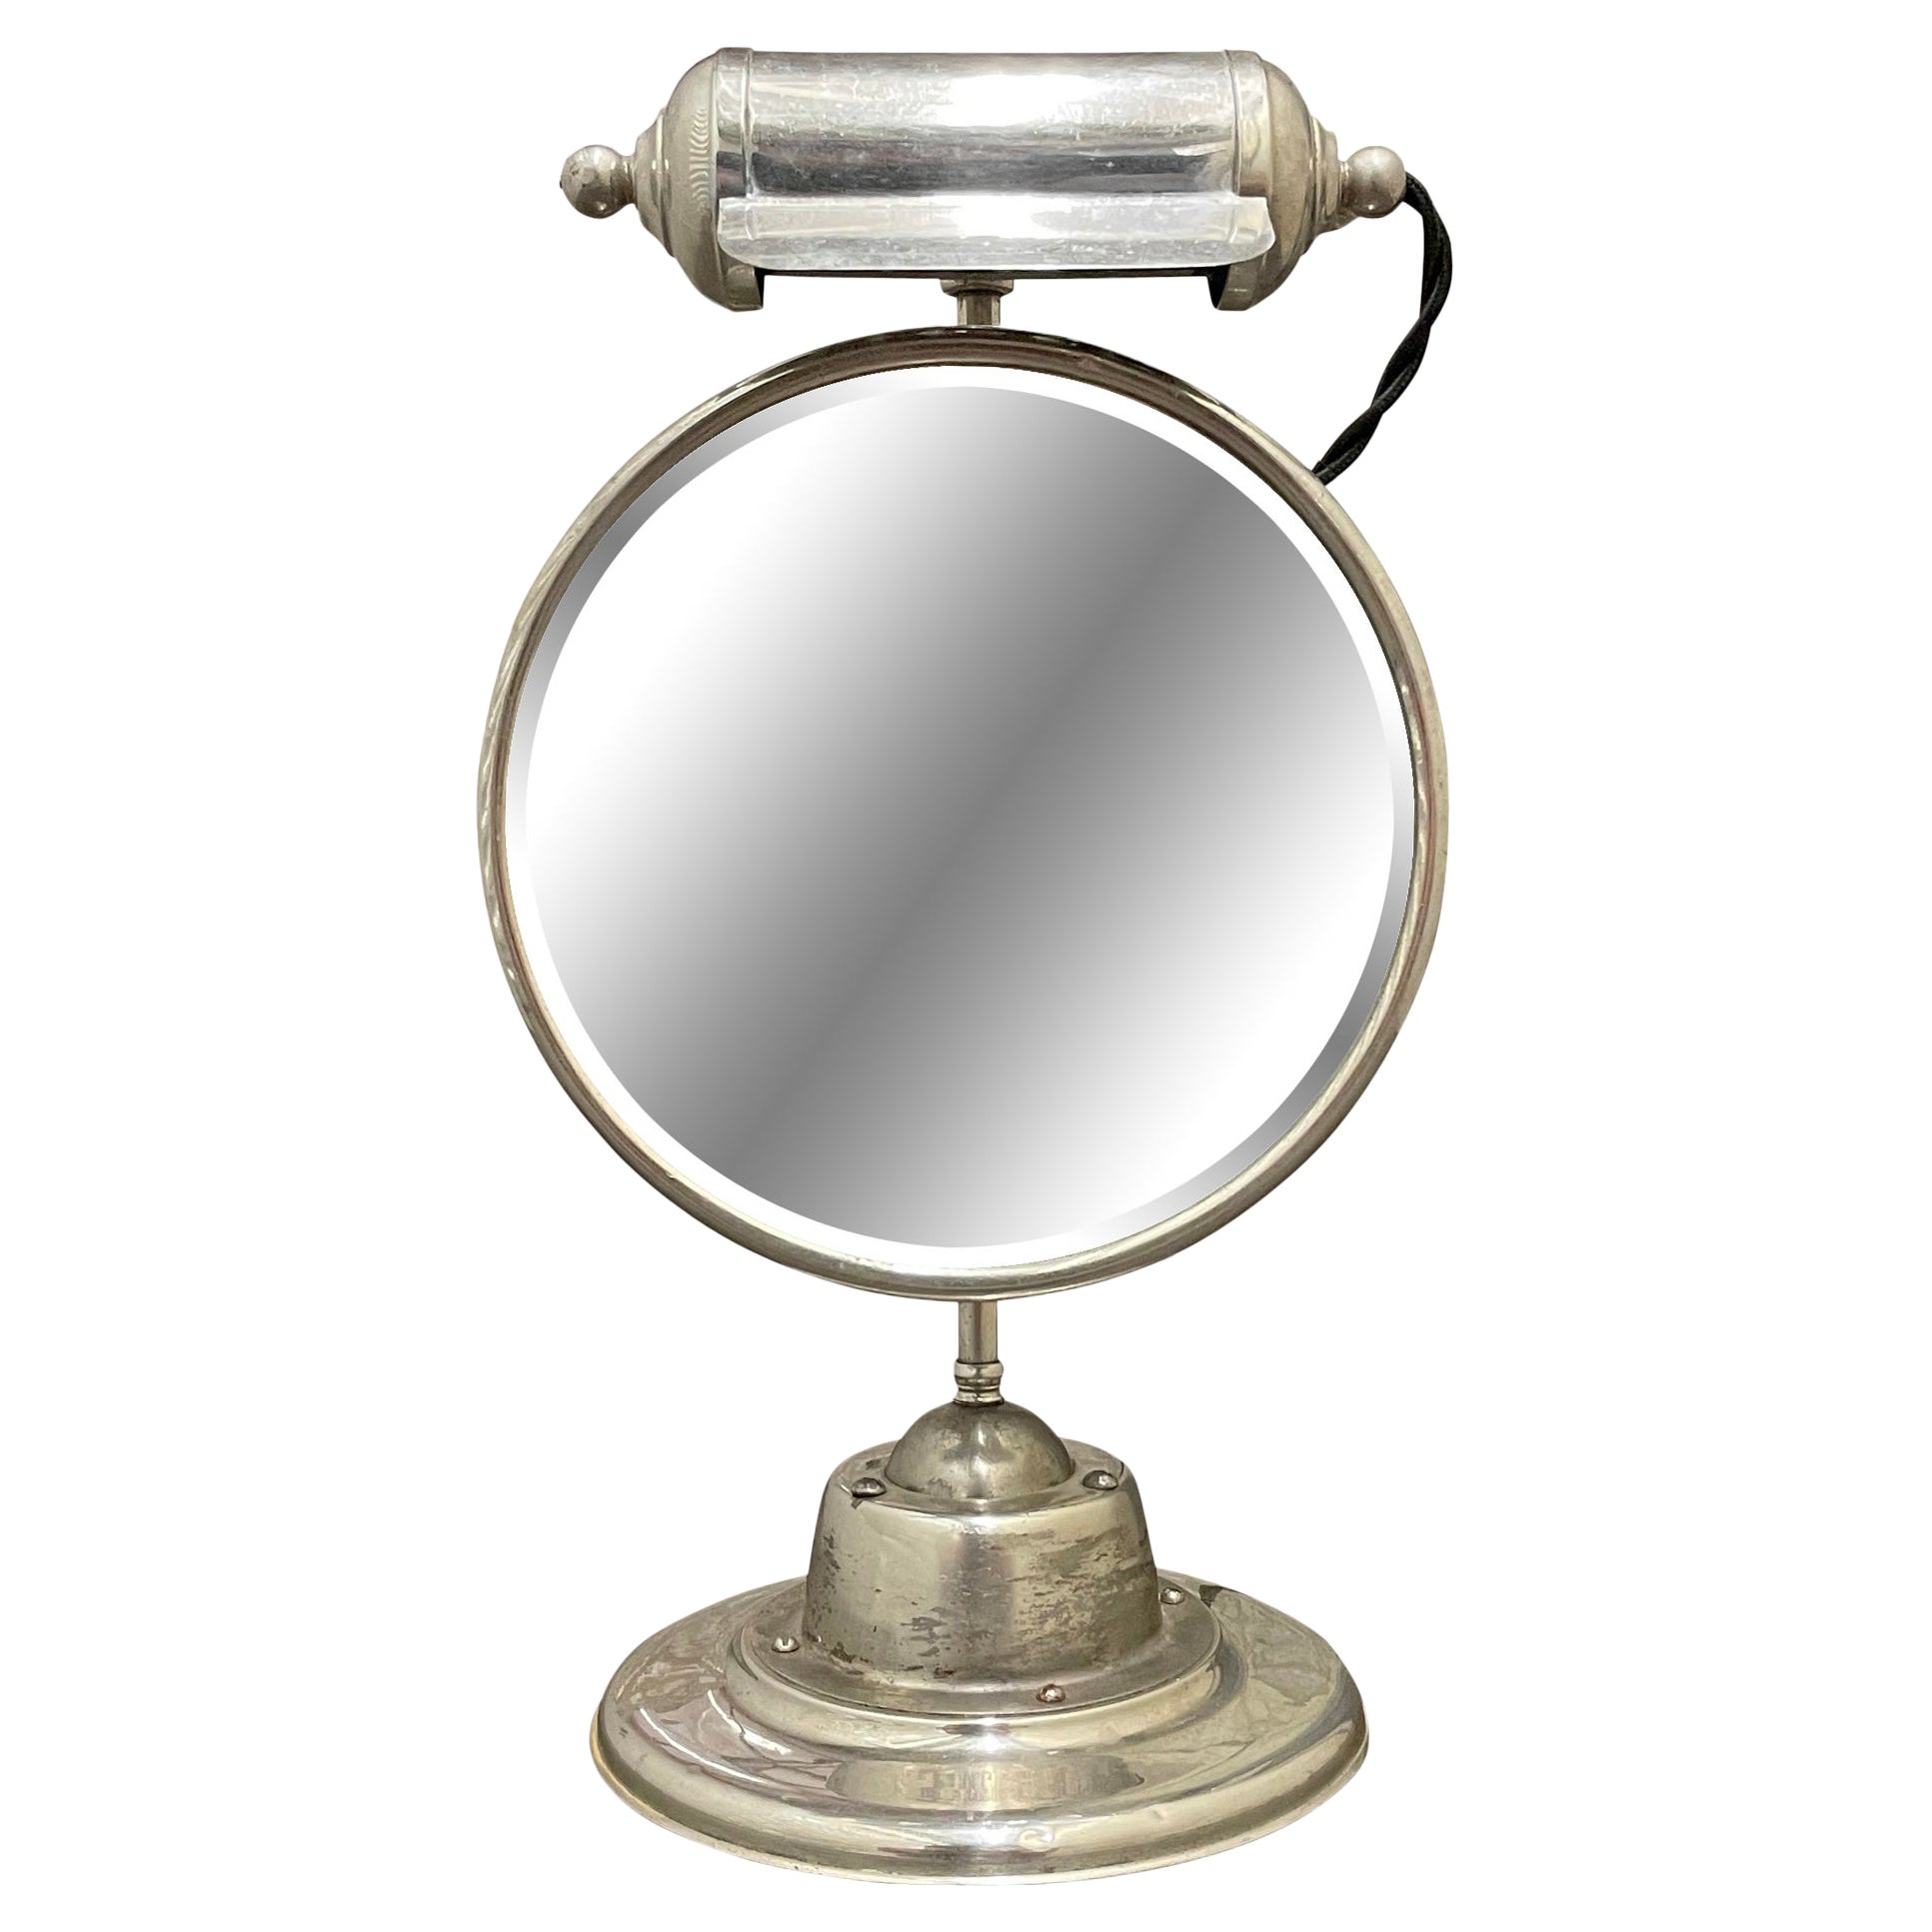 Early 20th Century American Lighted Shaving Mirror